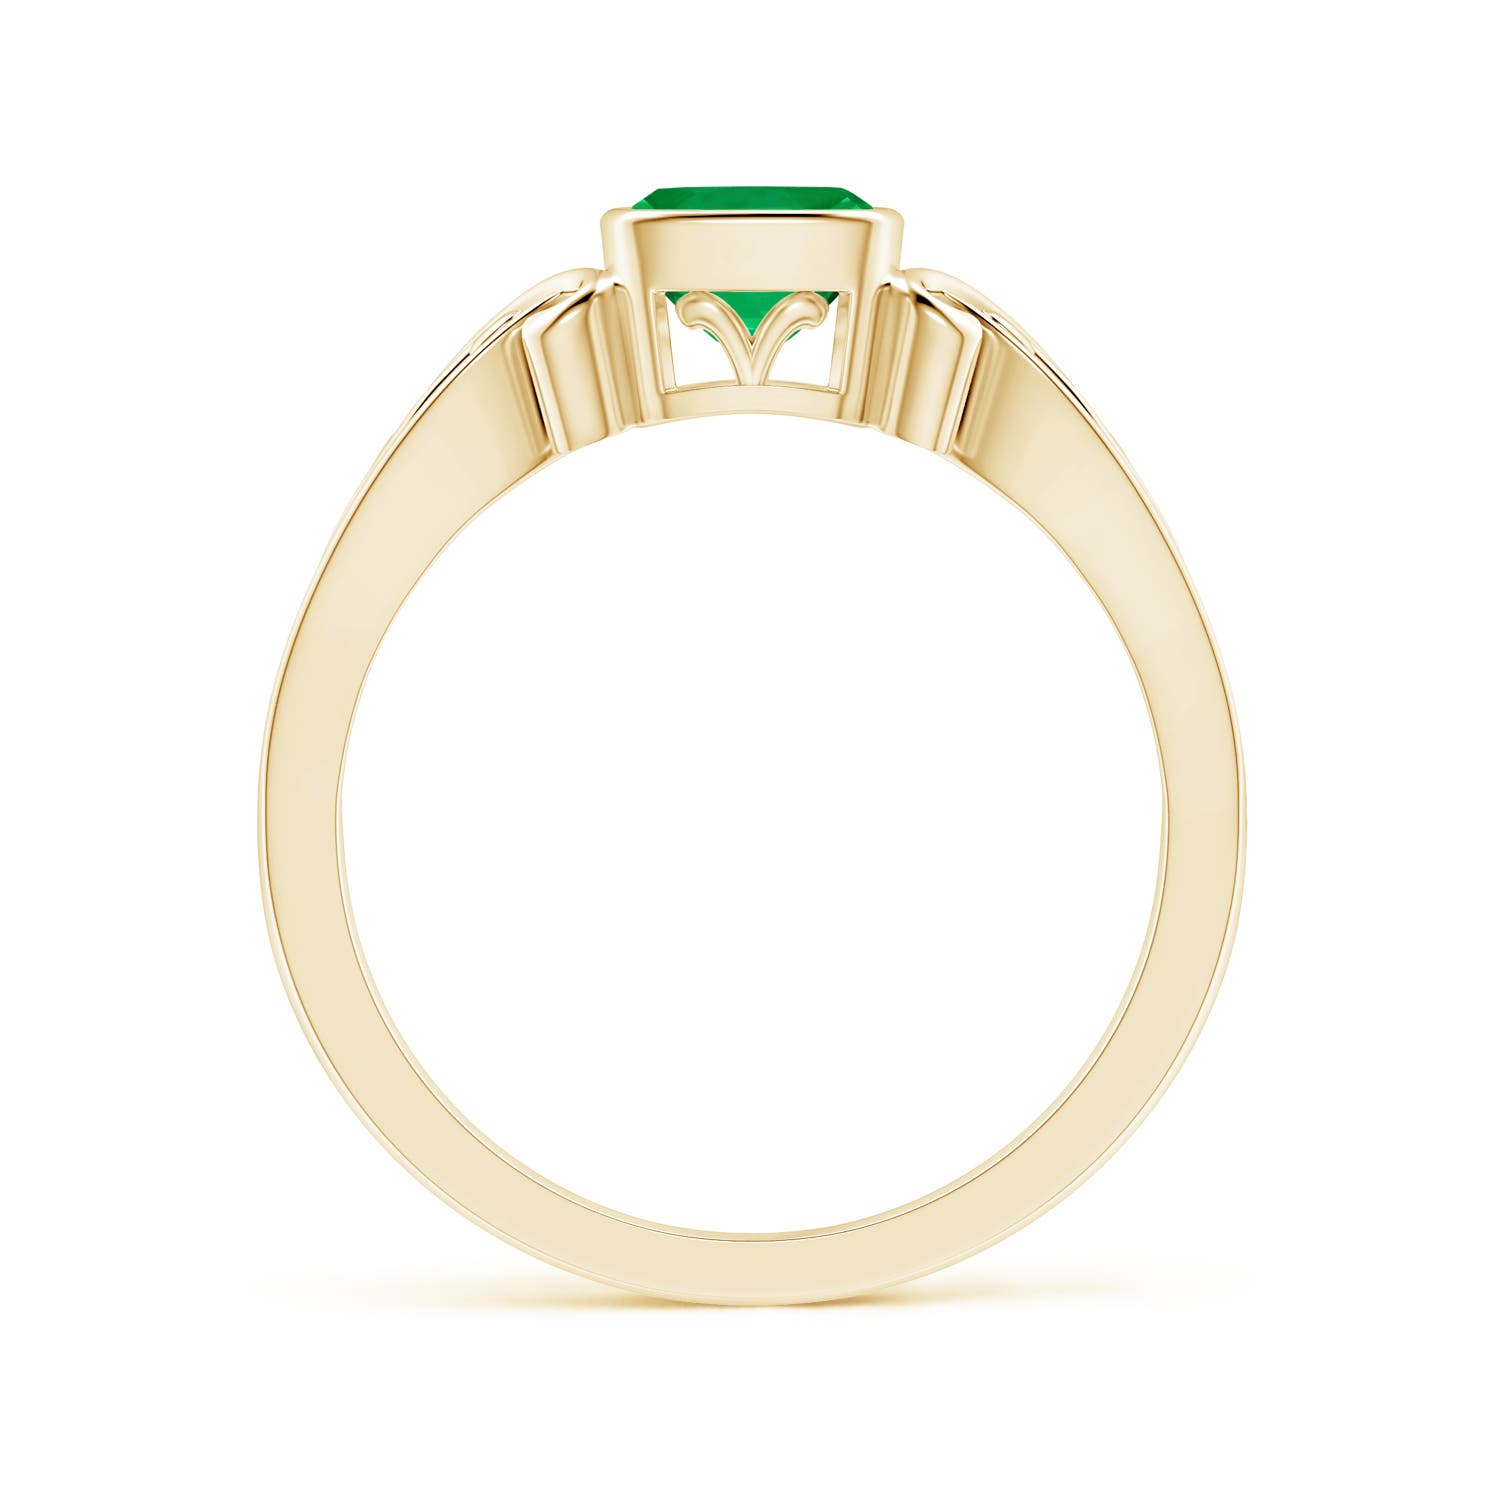 AAA - Emerald / 0.55 CT / 14 KT Yellow Gold